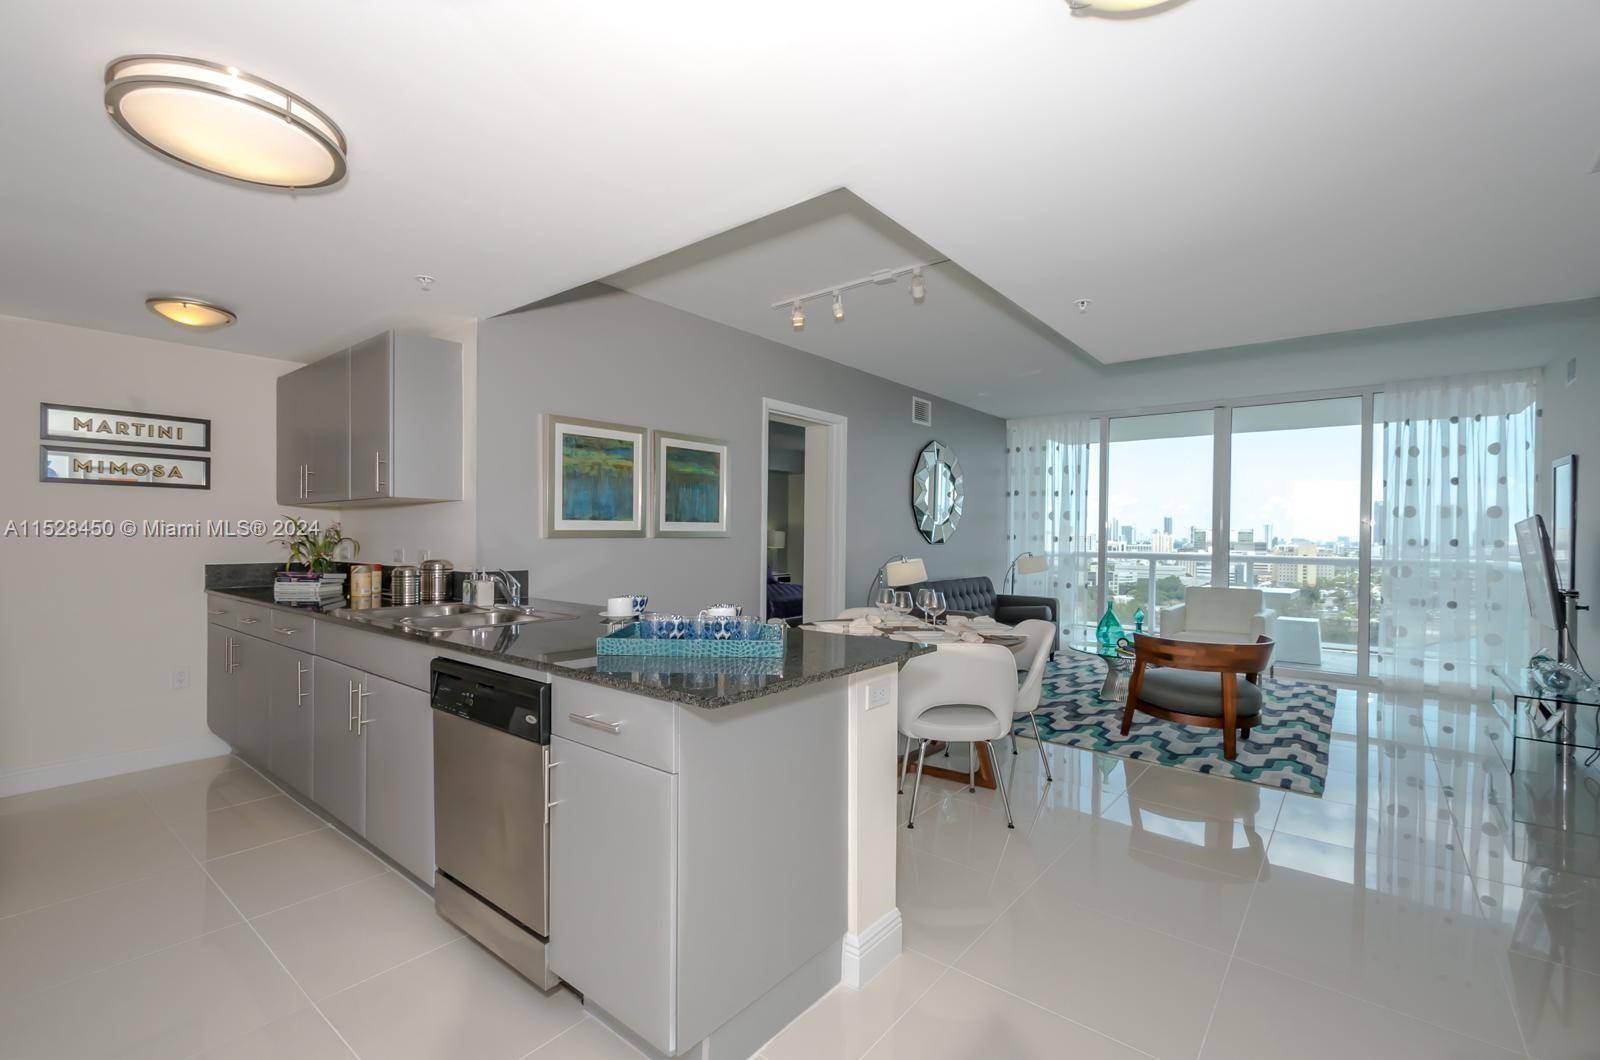 Luxury 2 bedroom 2 baths condo features open floor plan with spectacular river and city views, spacious balcony, stainless steel kitchen appliances and much more.